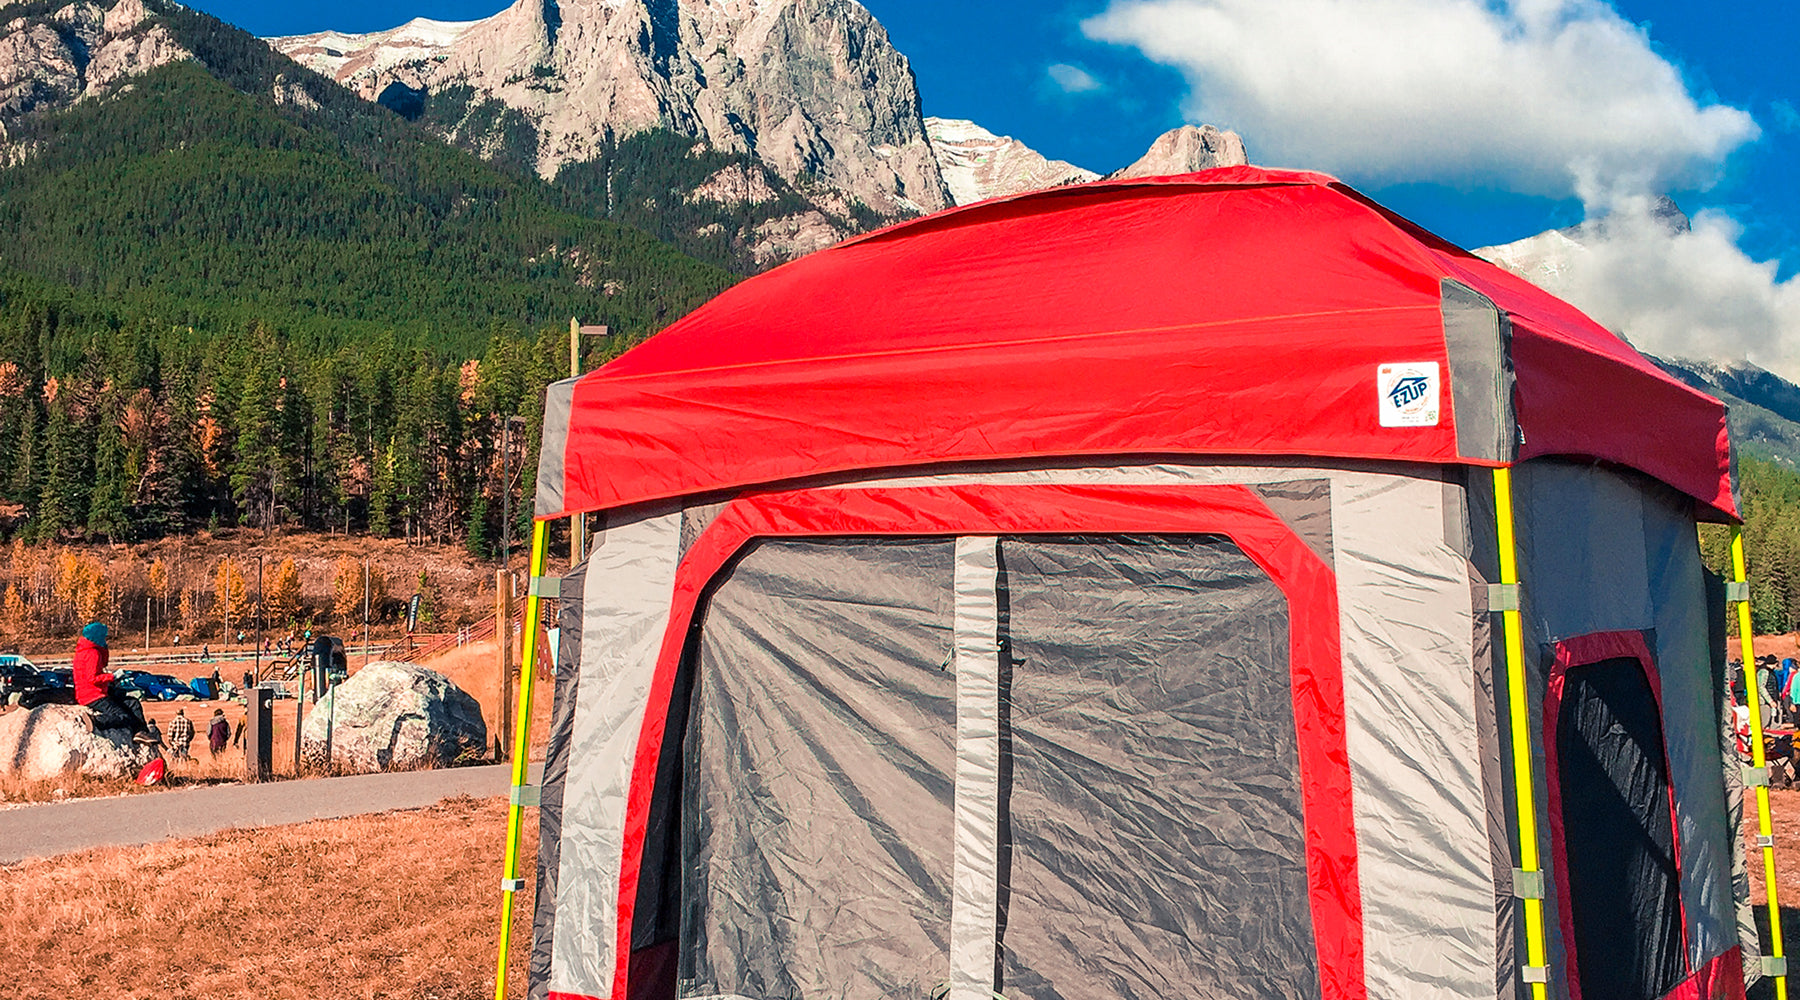 Don't let the cold interrupt your camping trip this winter